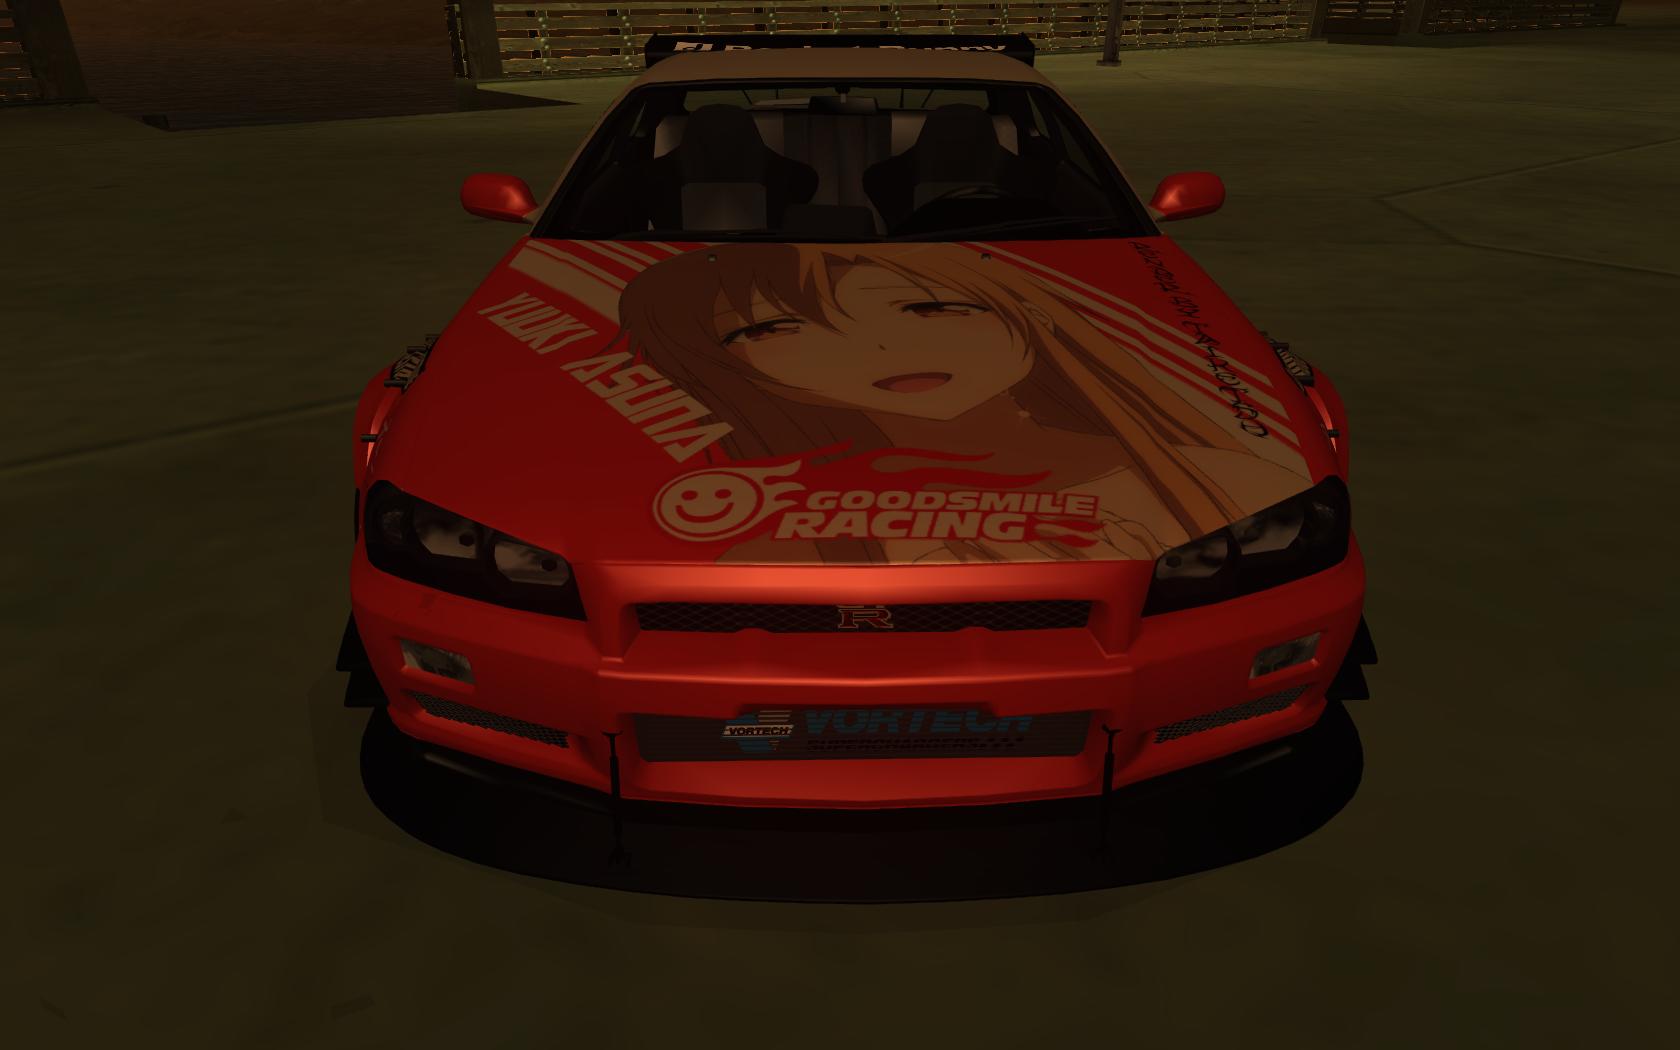 Nissan, Skyline, Skyline R34, Nissan Skyline GT R R34, GT R, Tuning, Cargame, Grand Theft Auto, San Andreas Wallpaper